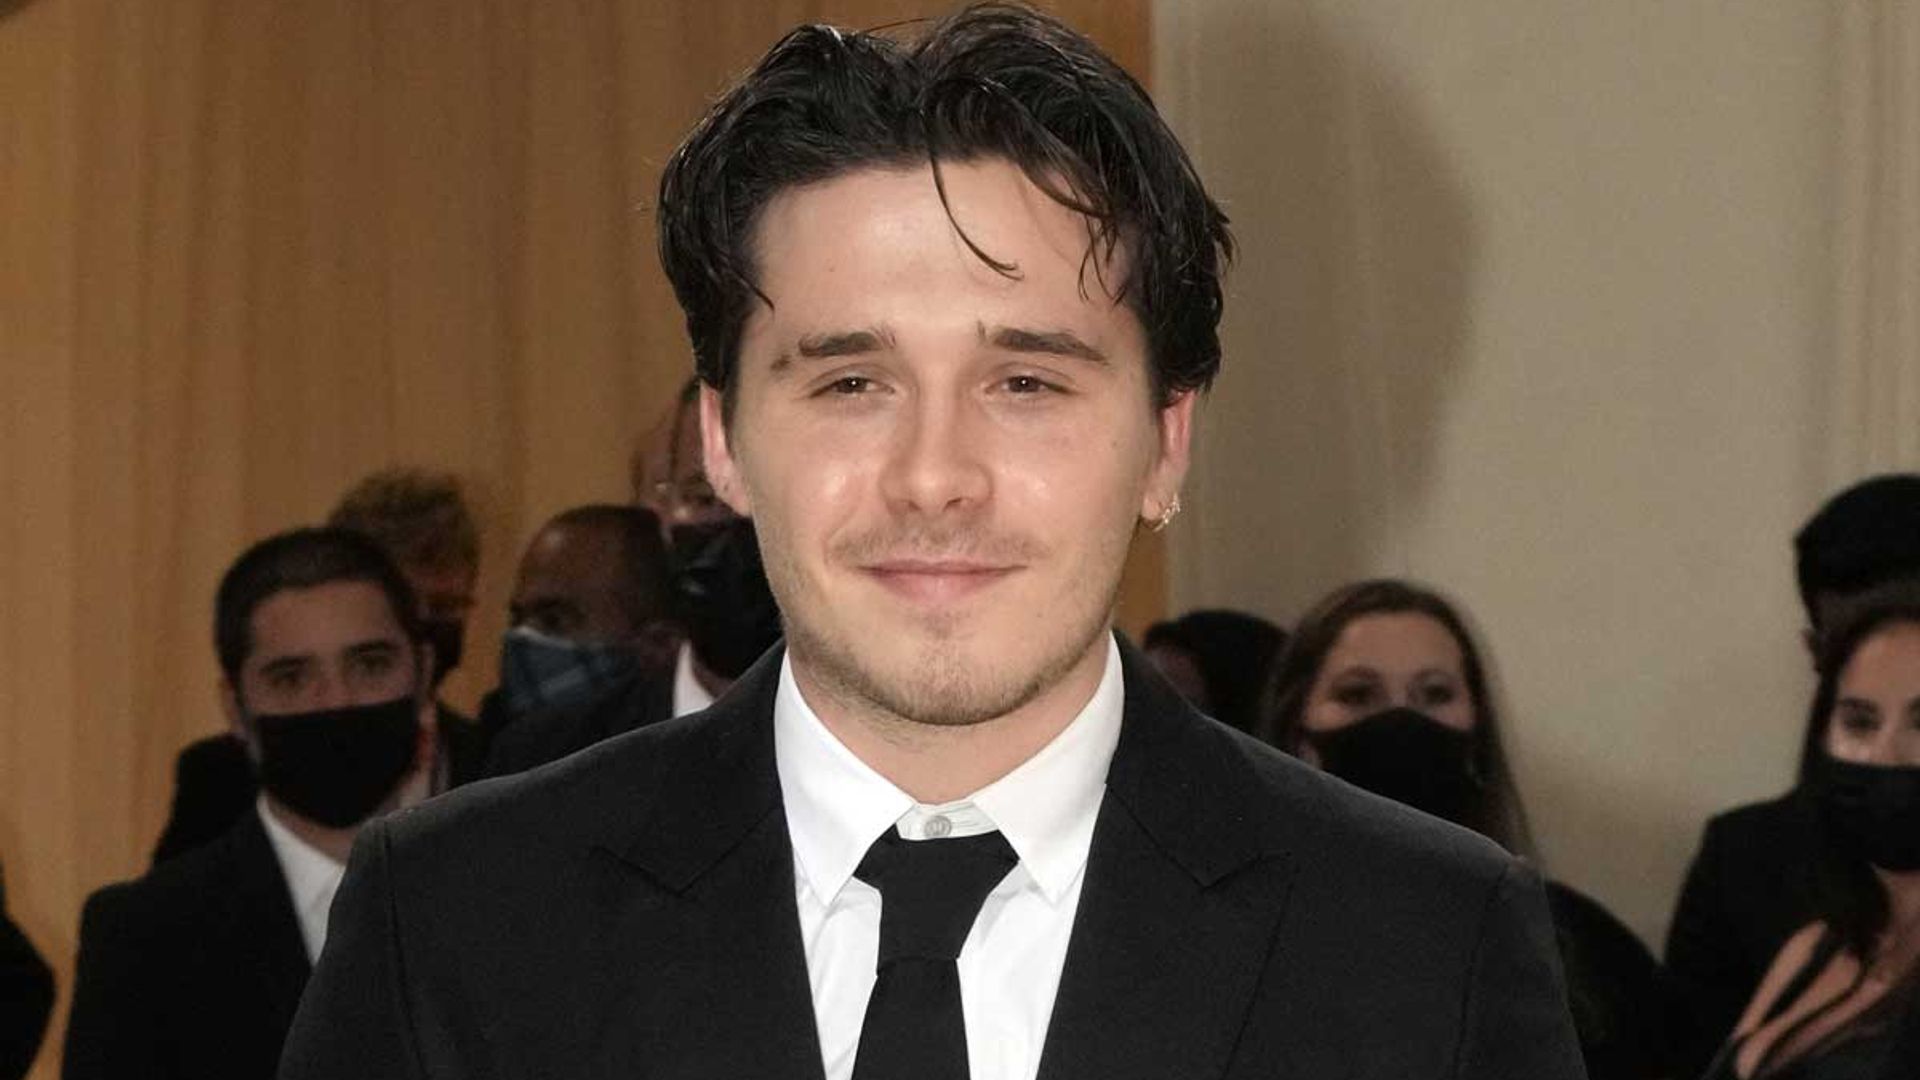 Brooklyn Beckham shares latest recipe that mum Victoria wouldn't approve of